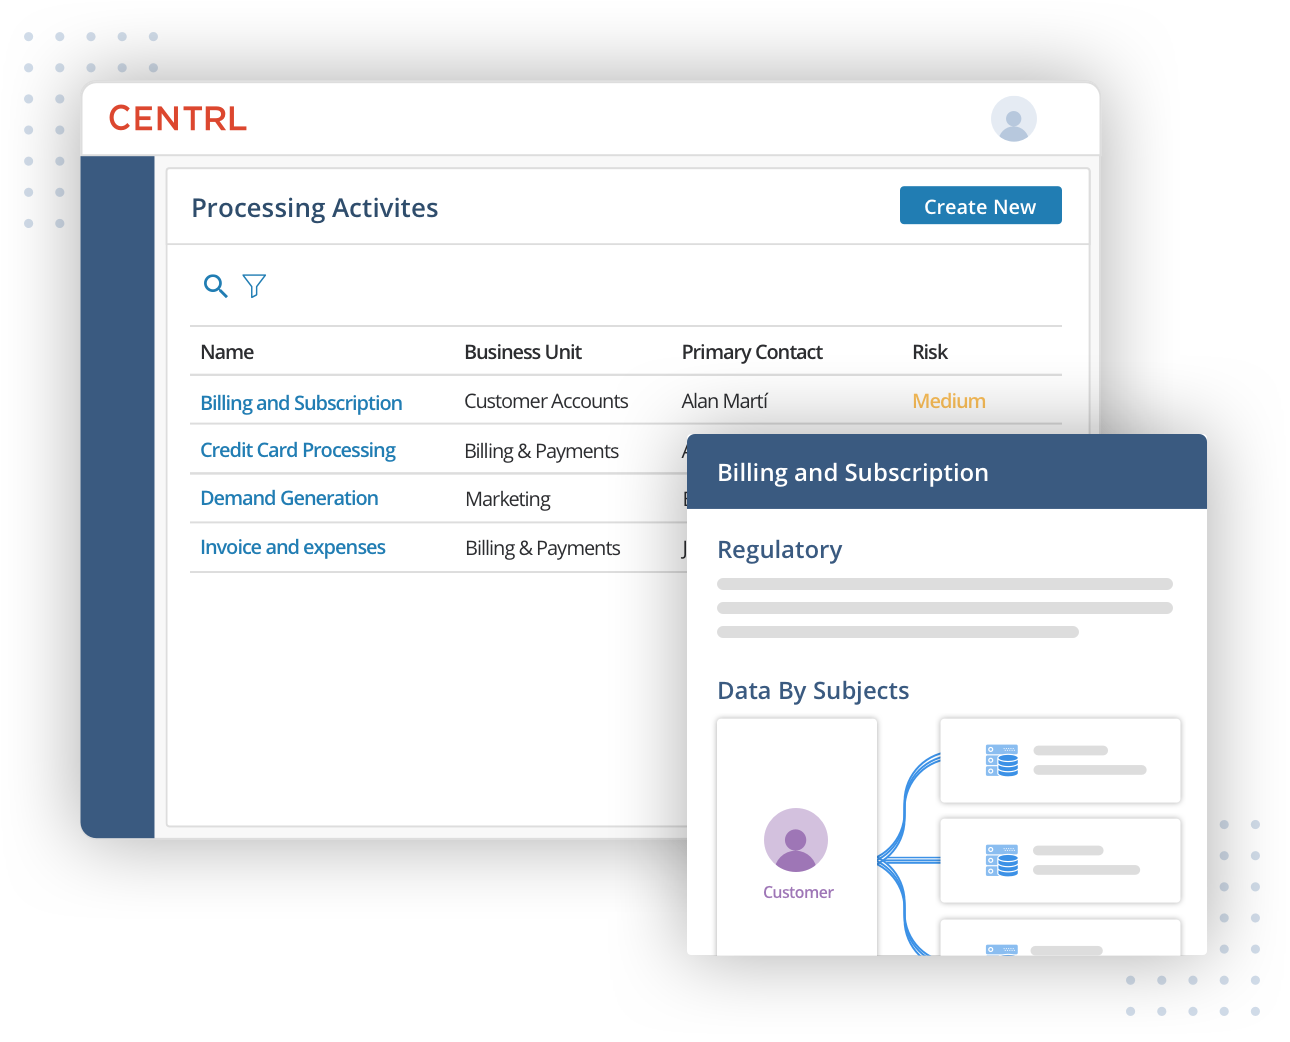 Generate real-time, up-to-date records of processing activities and more for compliance reporting